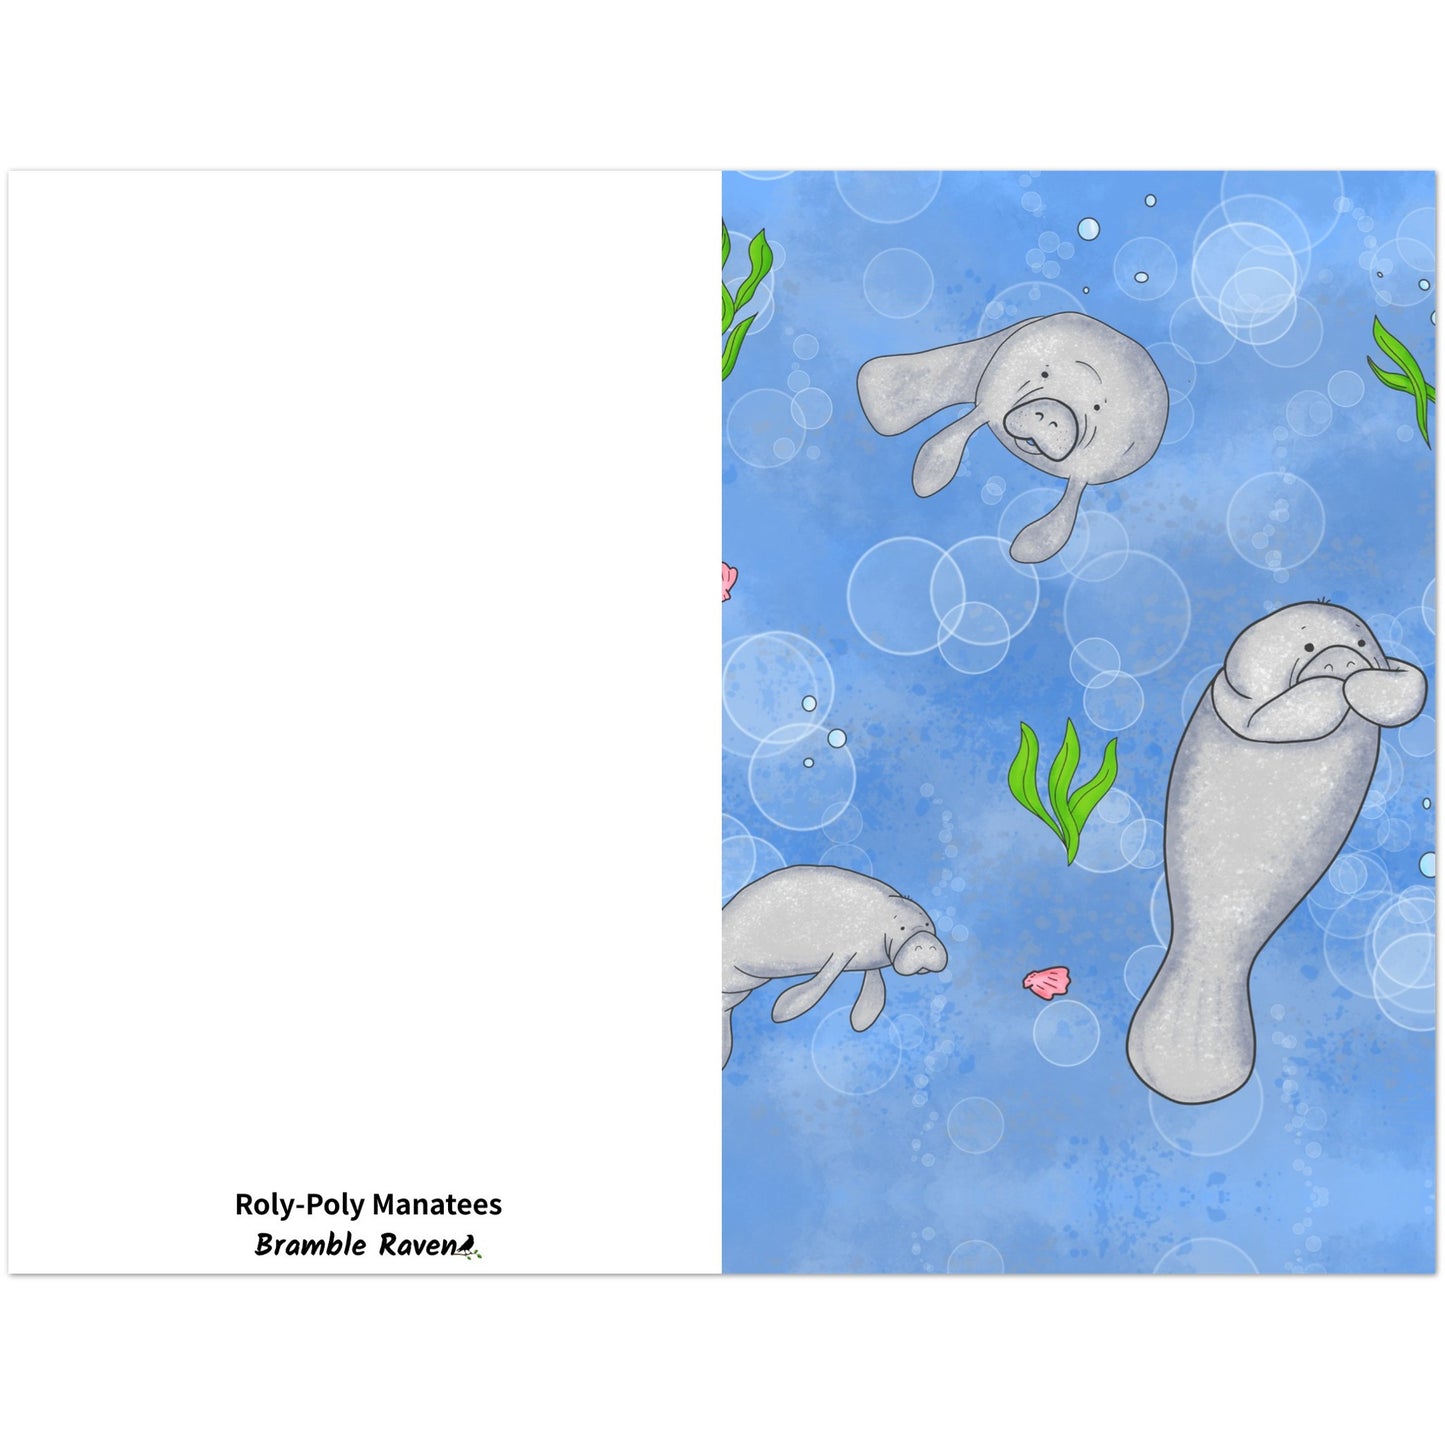 Pack of ten 5.5 x 8.5 inch greeting cards. Features illustrated roly-poly manatees on the front. Inside is blank. Made of coated paperboard. Comes with envelopes.